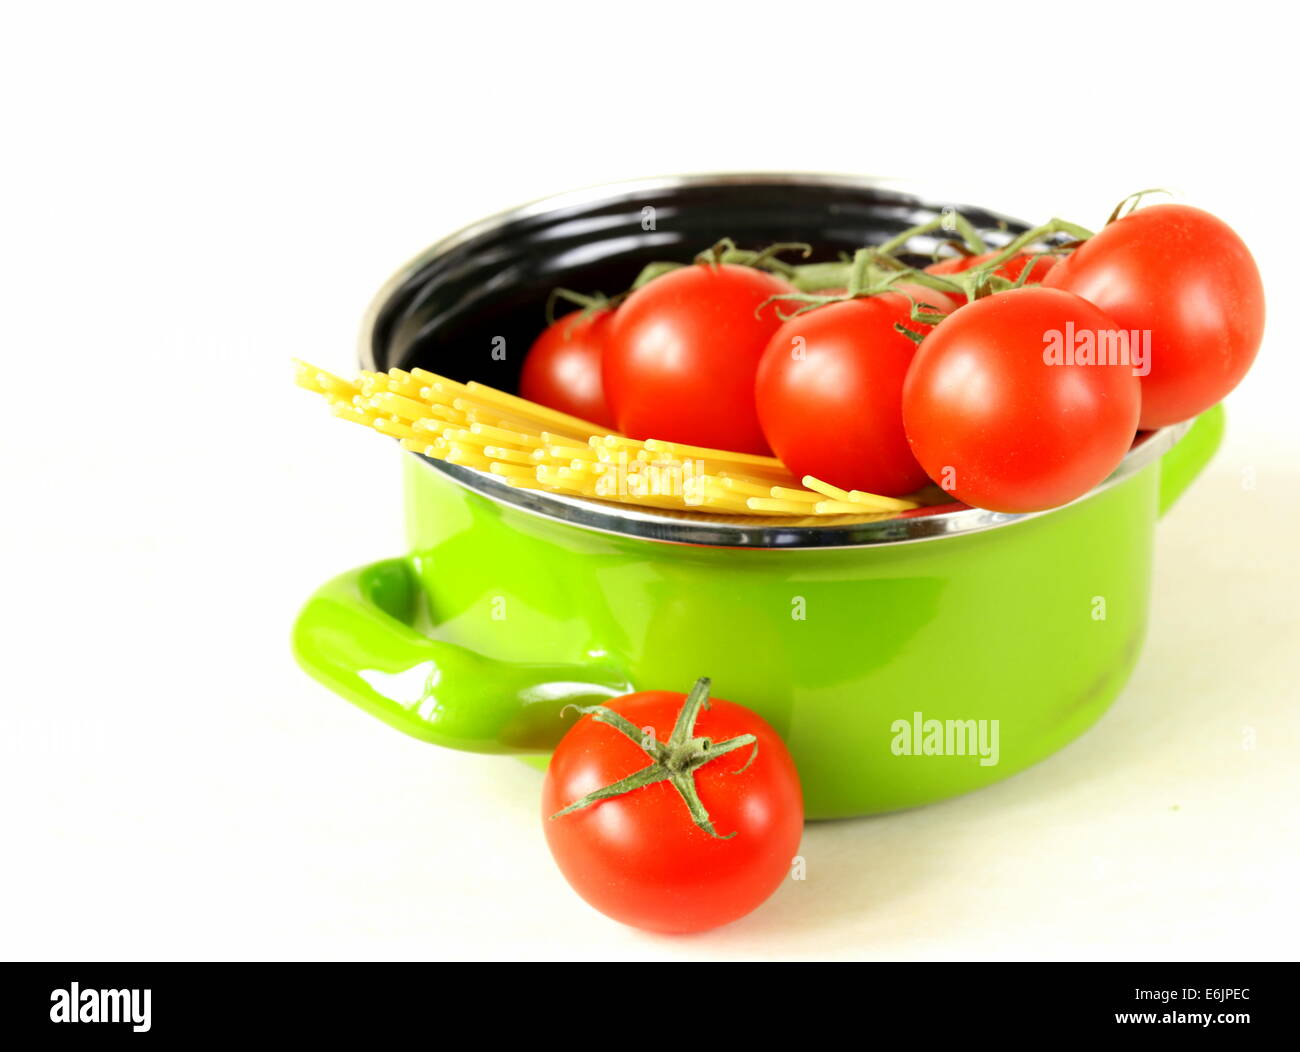 green pot full of tomatoes and pasta Stock Photo